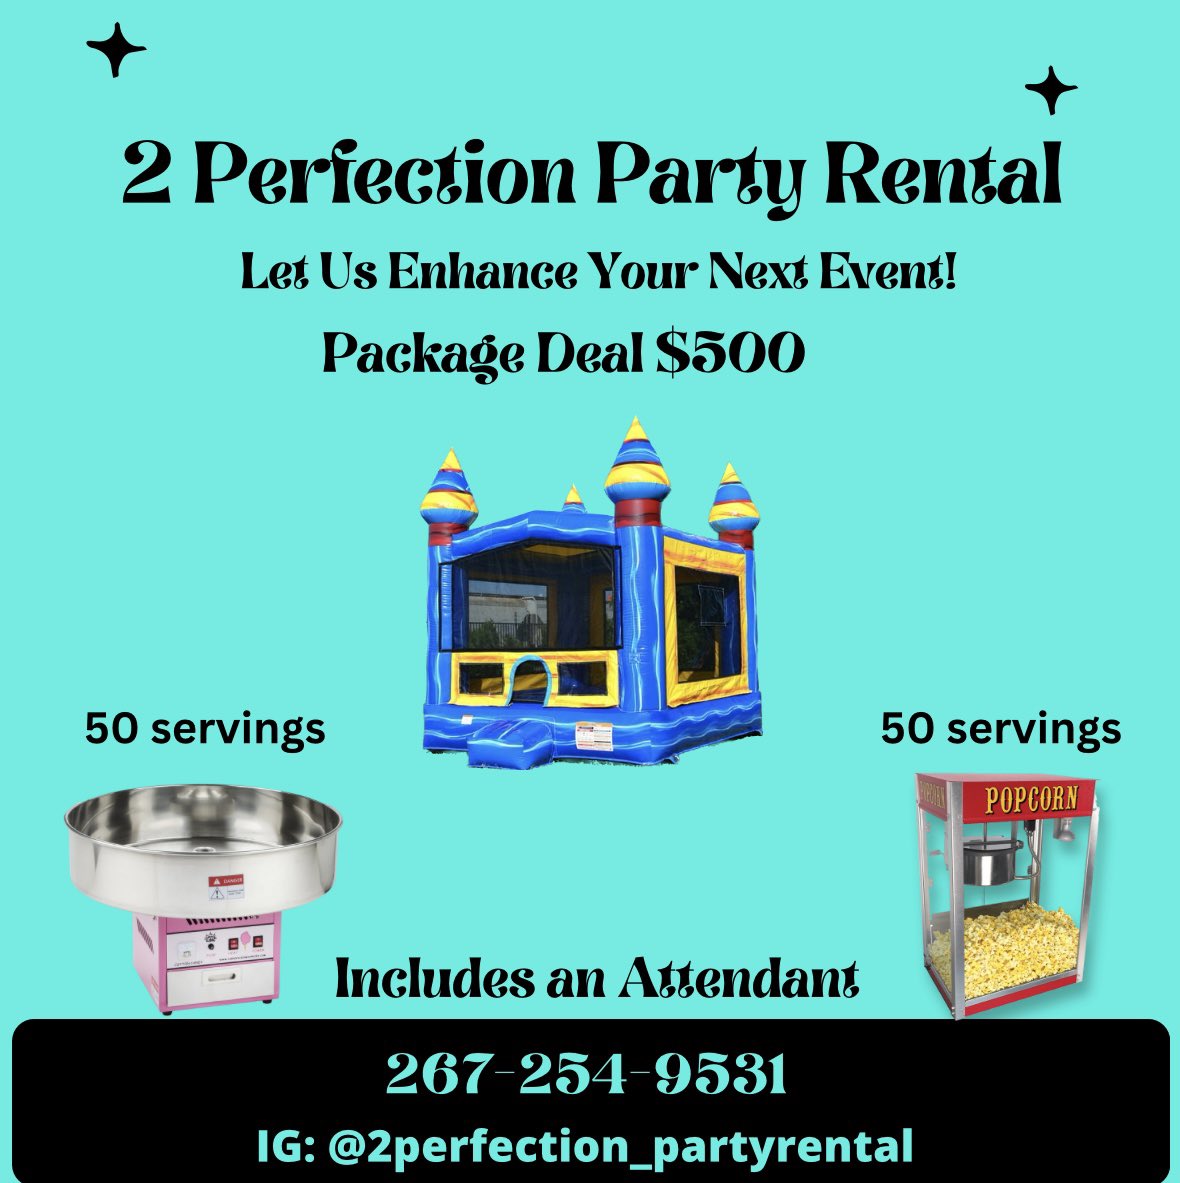 Rent our moon bounce and concessions for your next event  #partyrental #cottoncandy #popcorn #moonbounce #entertainment #events  #birthdayparty #cookout #familyreunion #bookwithme #philly #nj #de